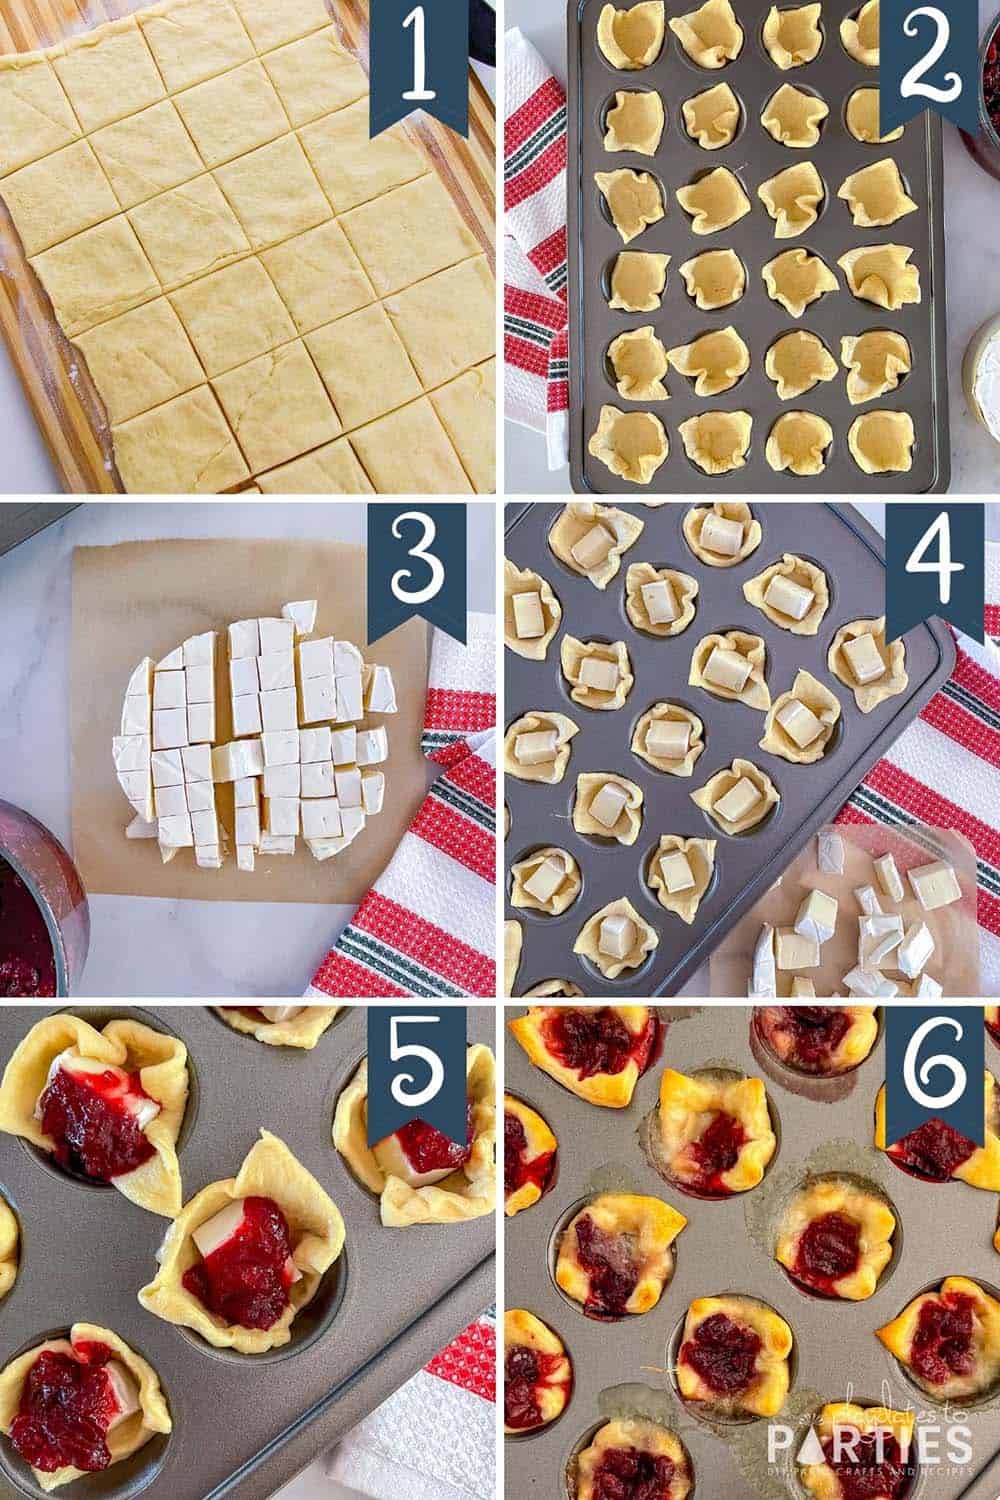 Steps 1 through 6 for how to make cranberry brie bites appetizers.